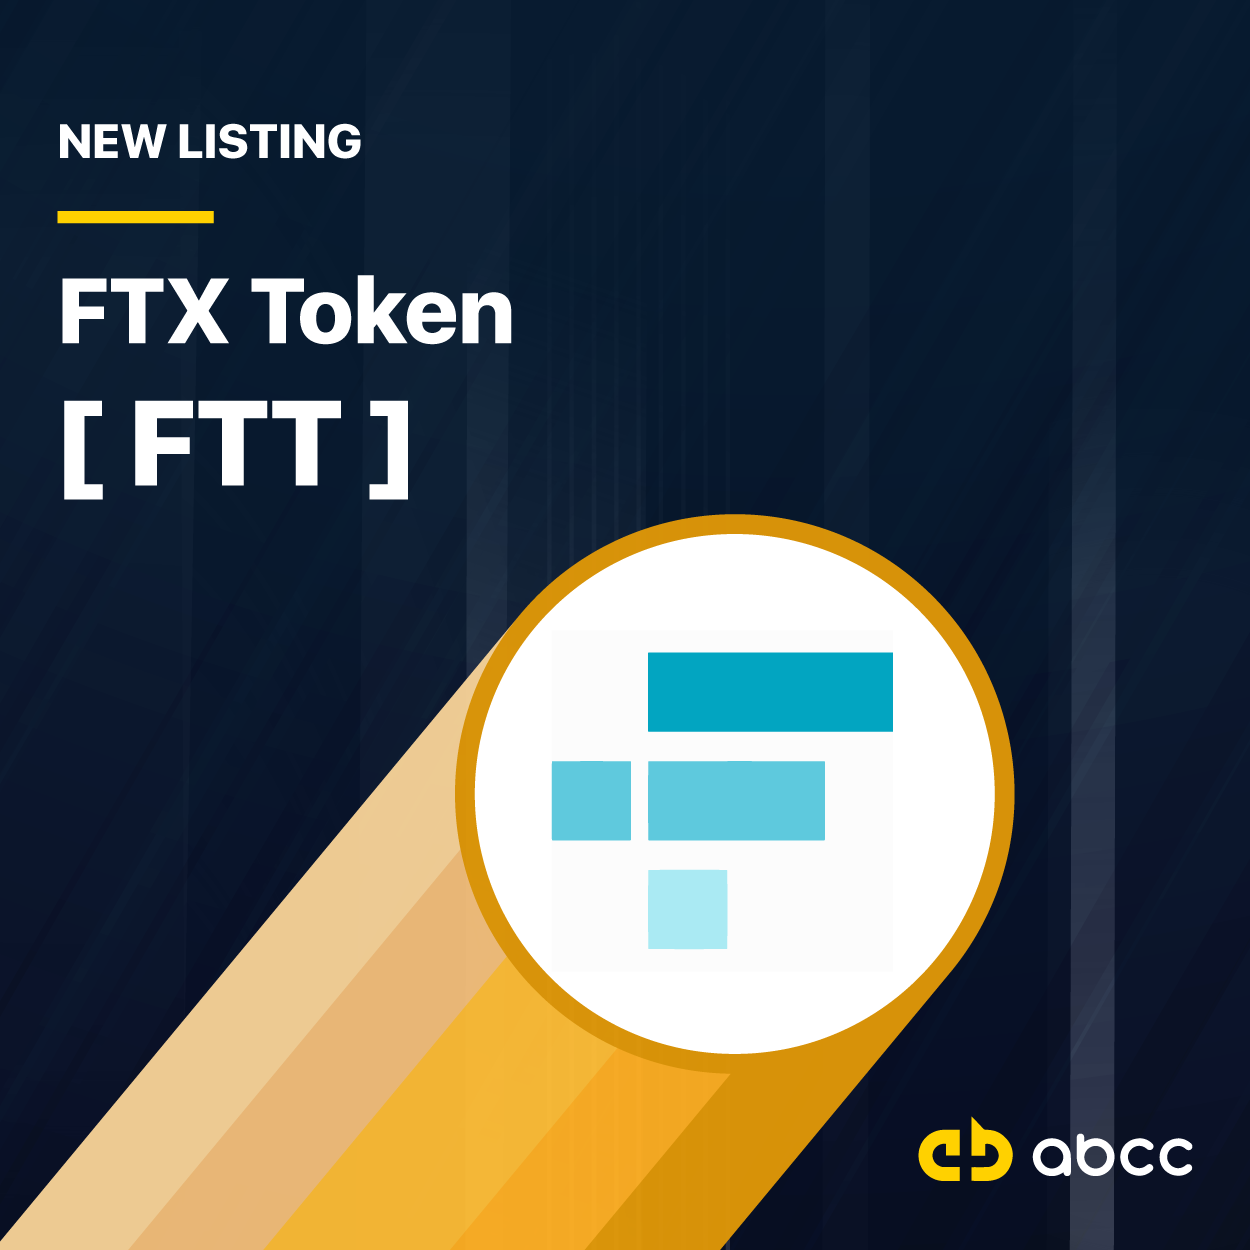 new_listing__FTT_.png